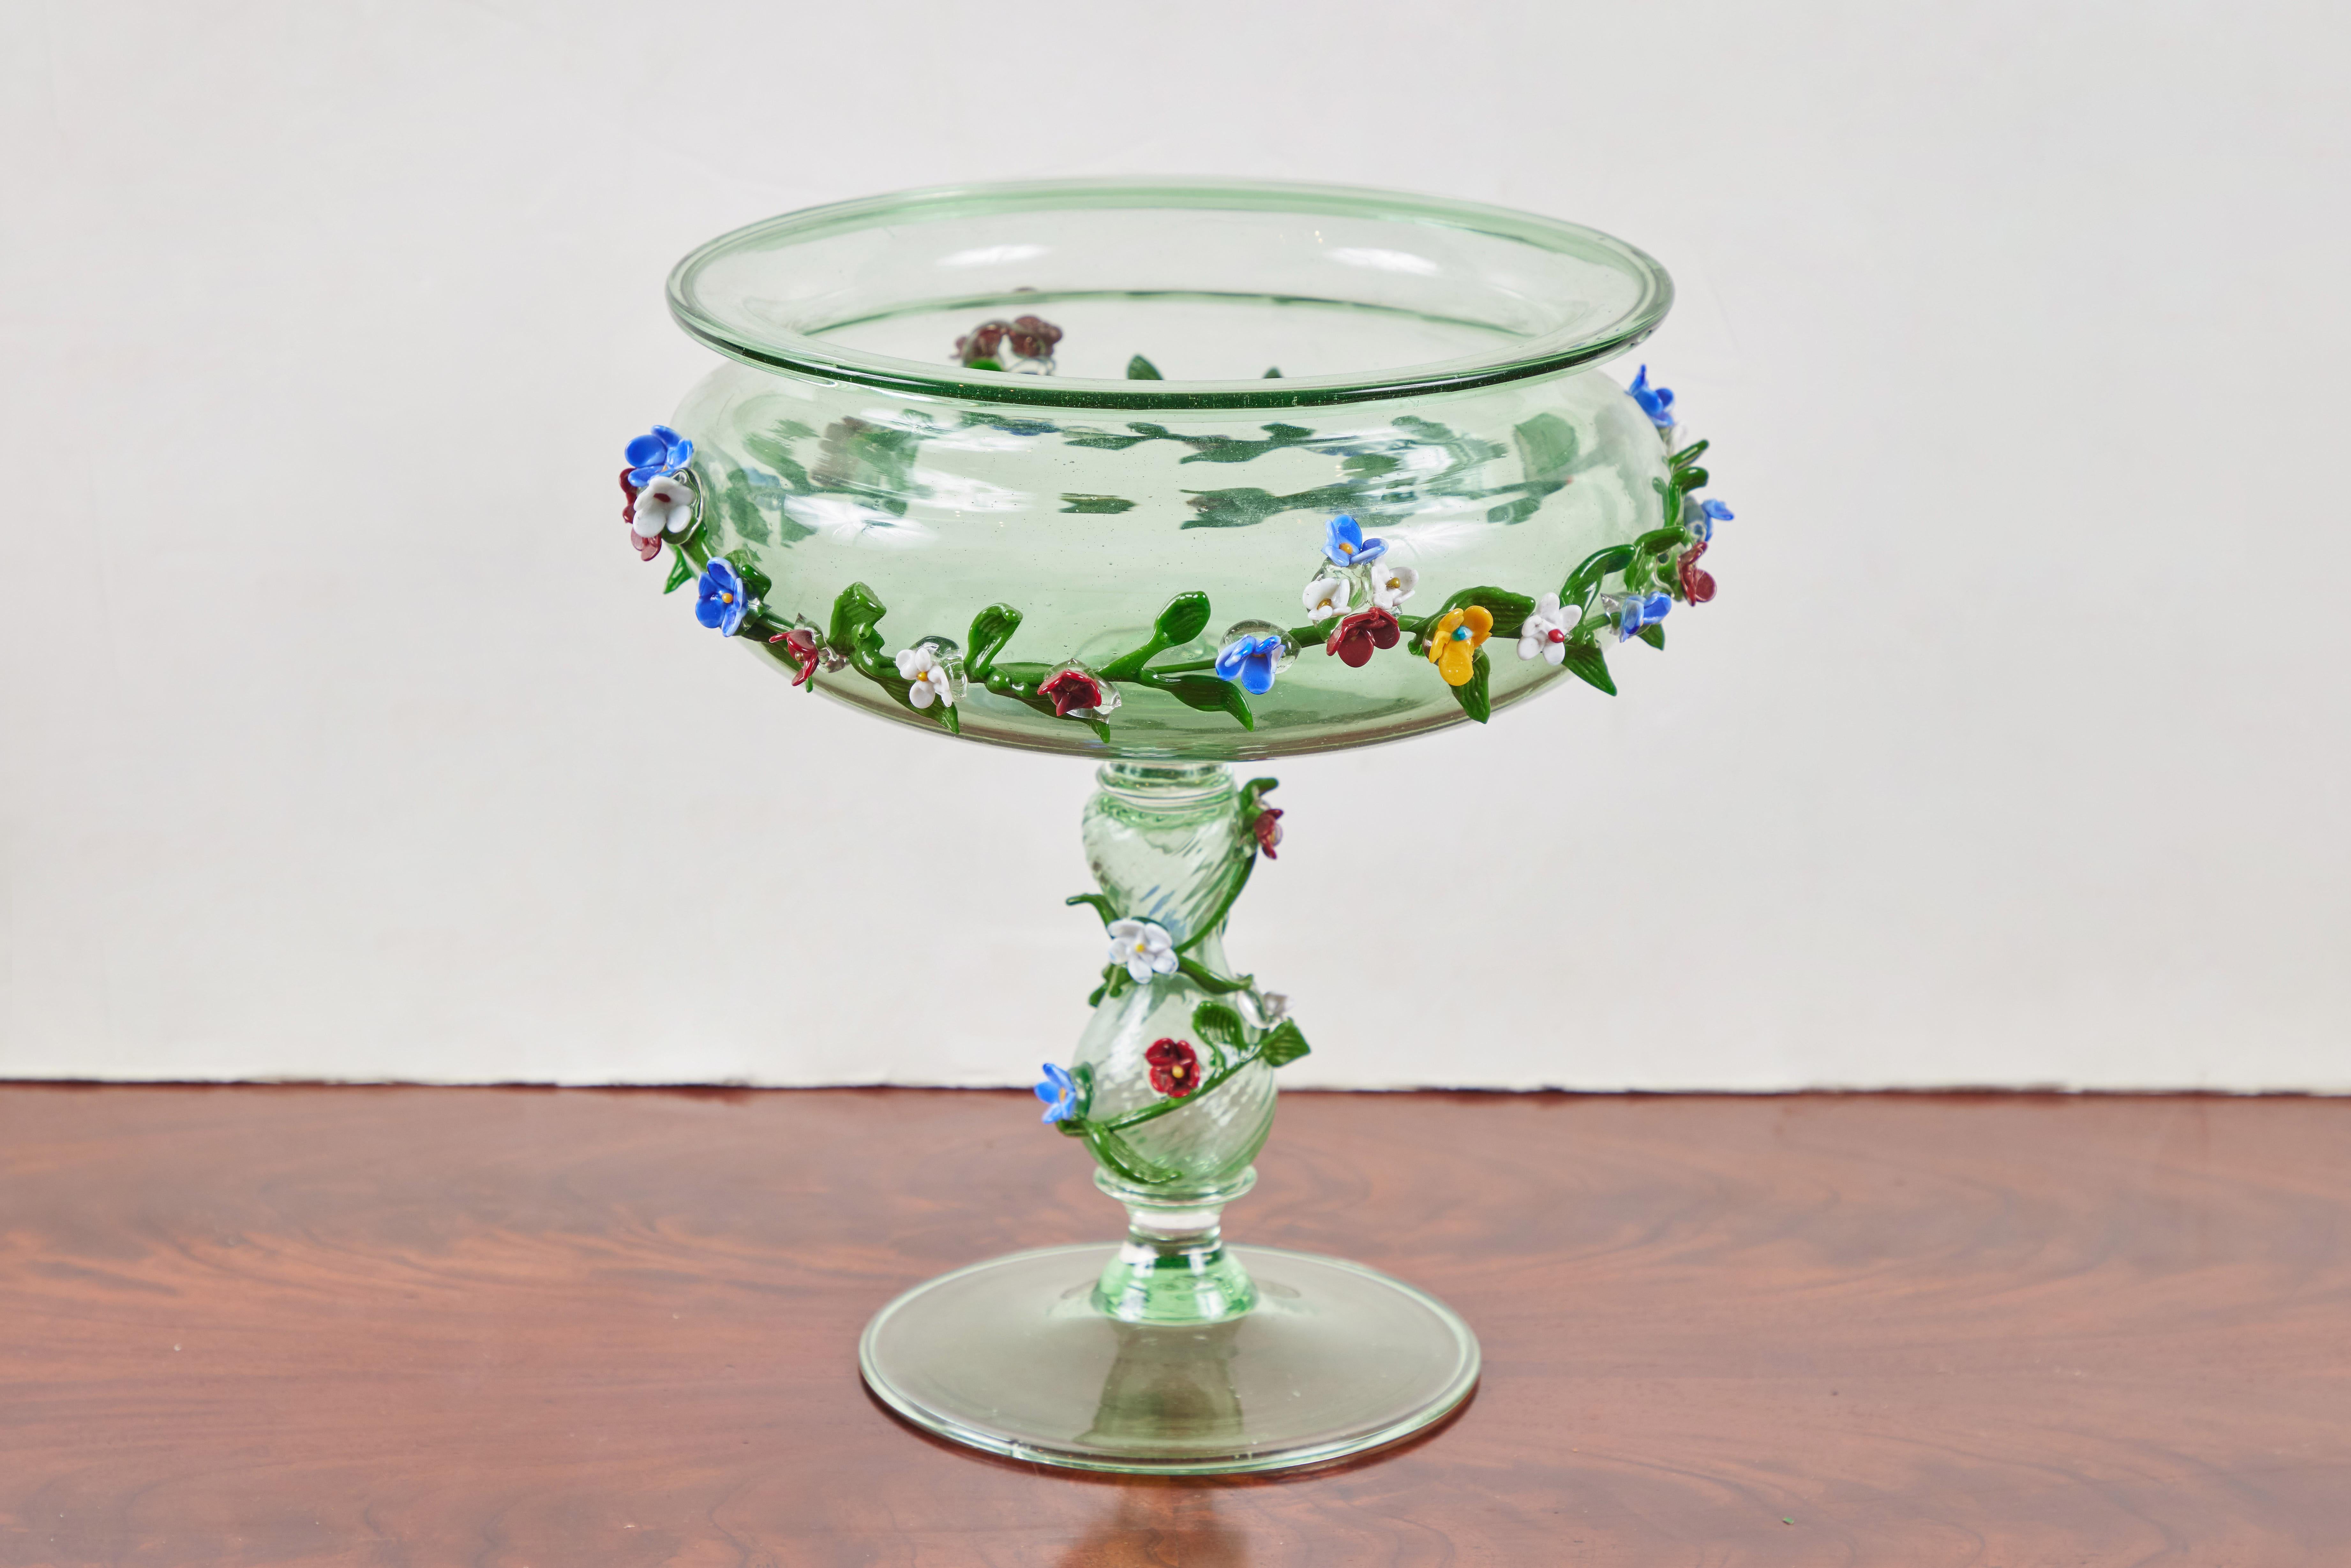 Lovely, c. 1920, hand-blown, Murano glass tazza in a fresh, Spring green. The lipped bowl is adorned with an applique garland of individually formed flowers and leaves in a variety of colors that winds down the rigadin stem.